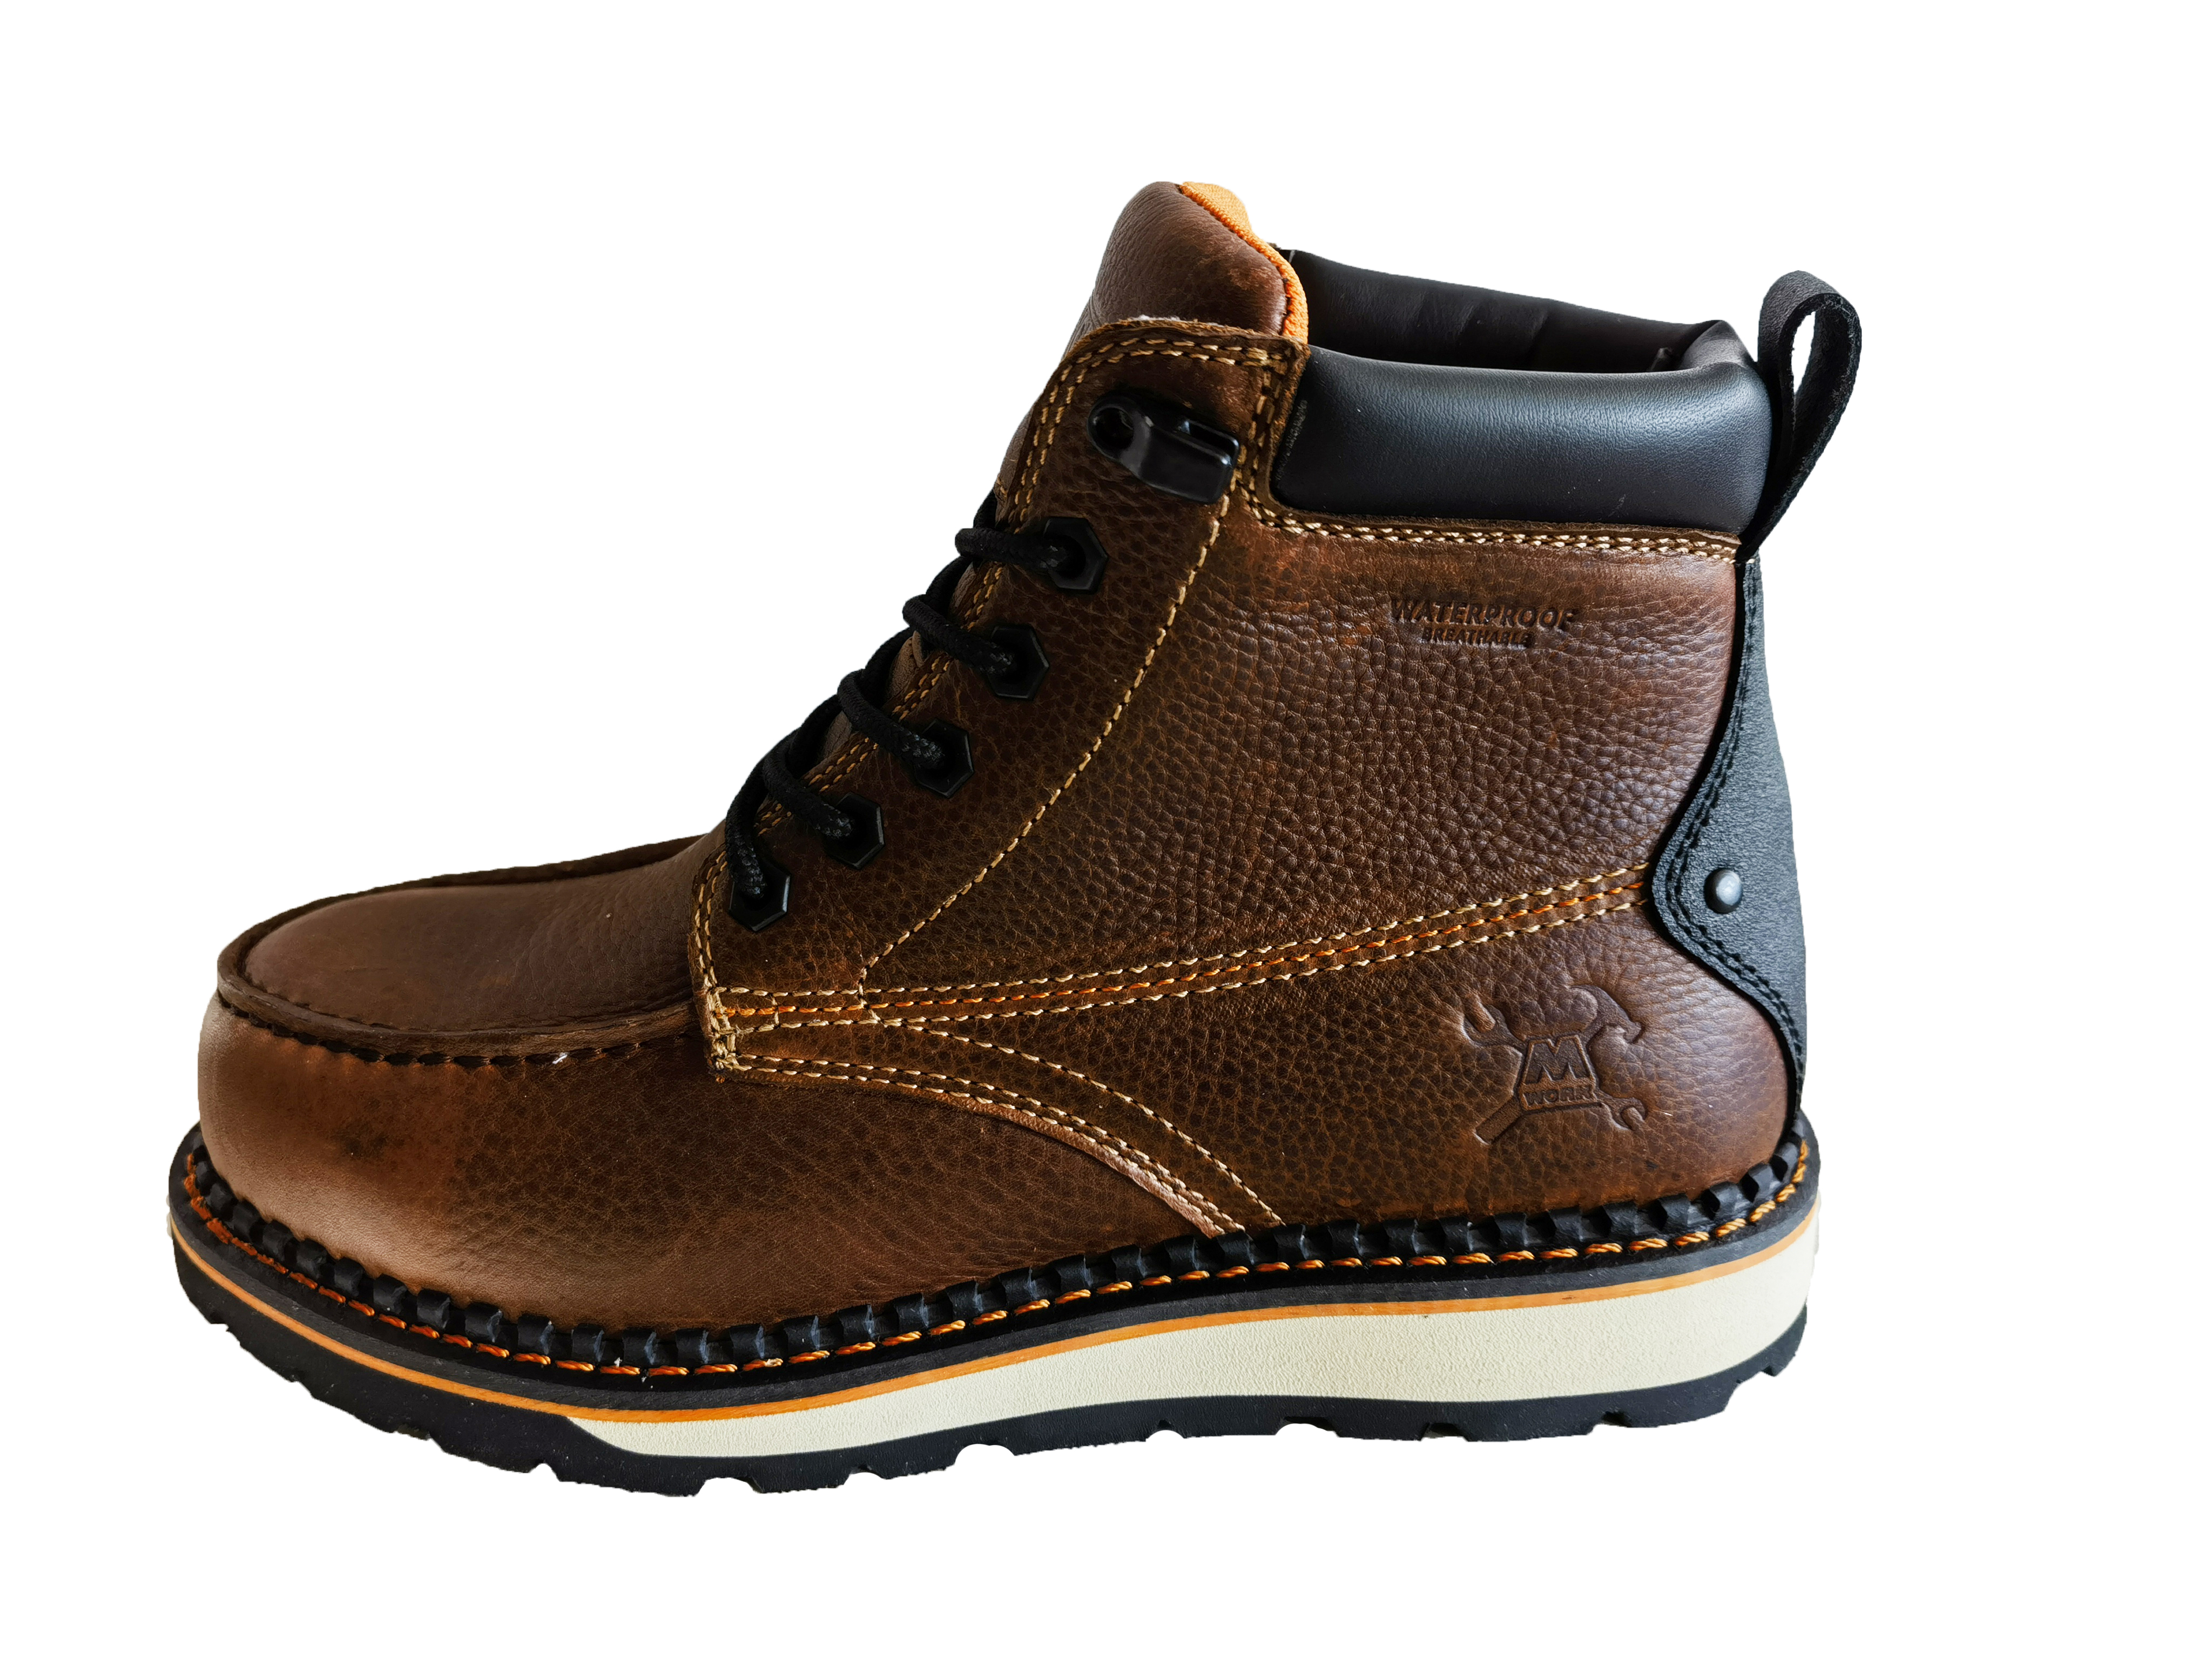 Discover the Benefits of Light Weight Safety Footwear in the Workplace